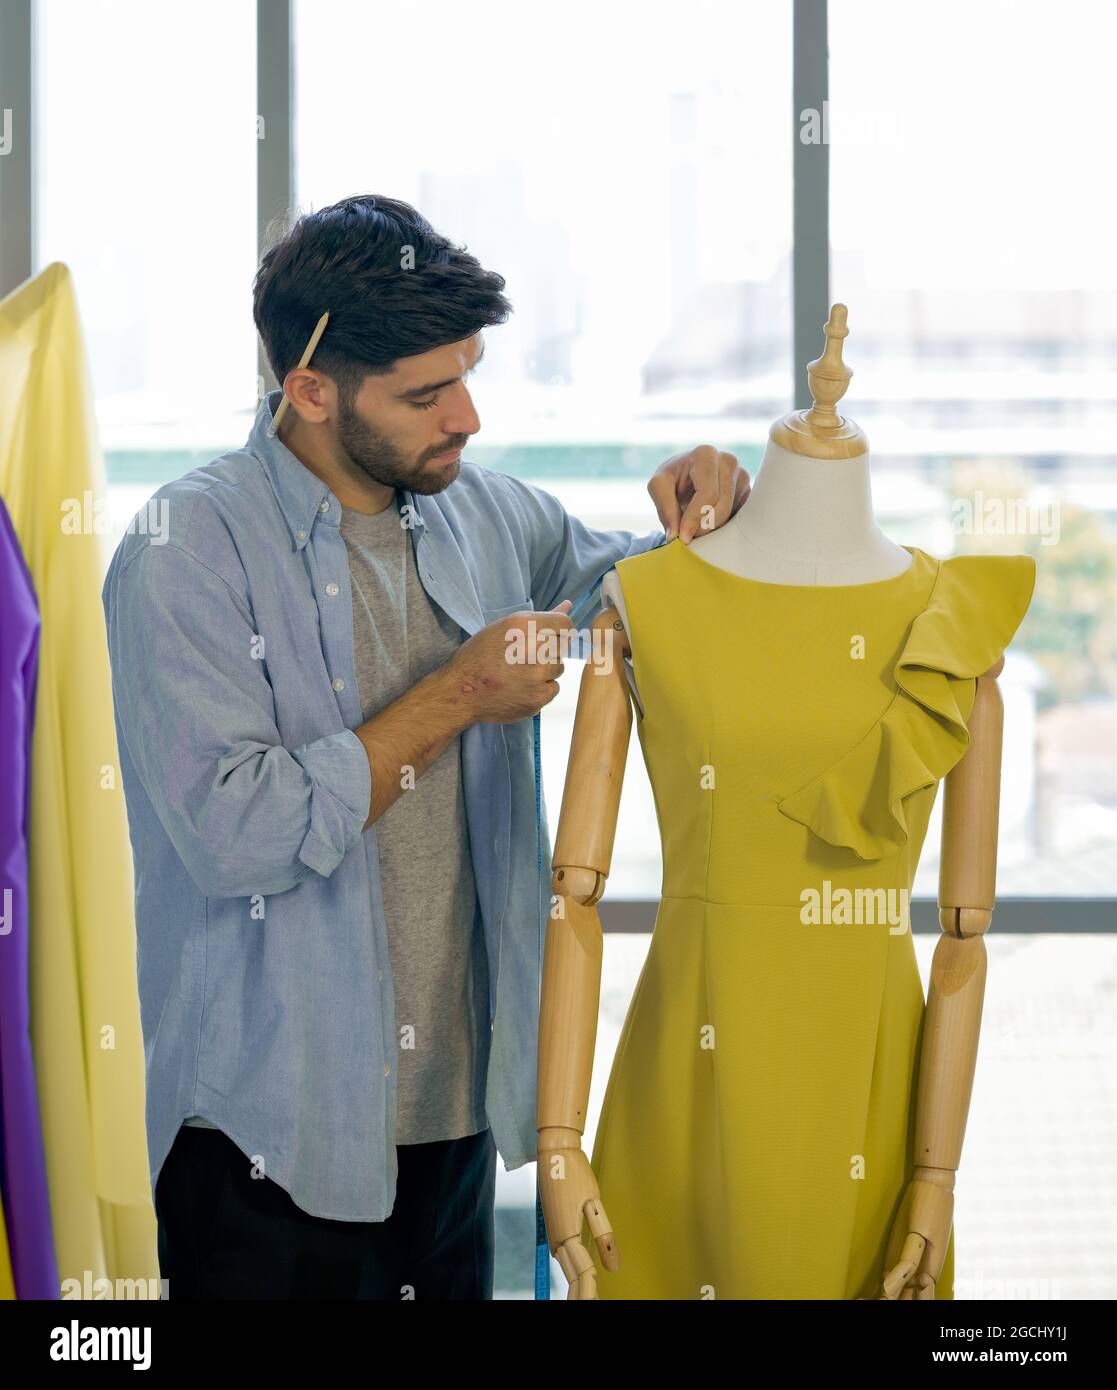 A Dressmakers Mannequin With A Yellow Tape Measure Stock Photo